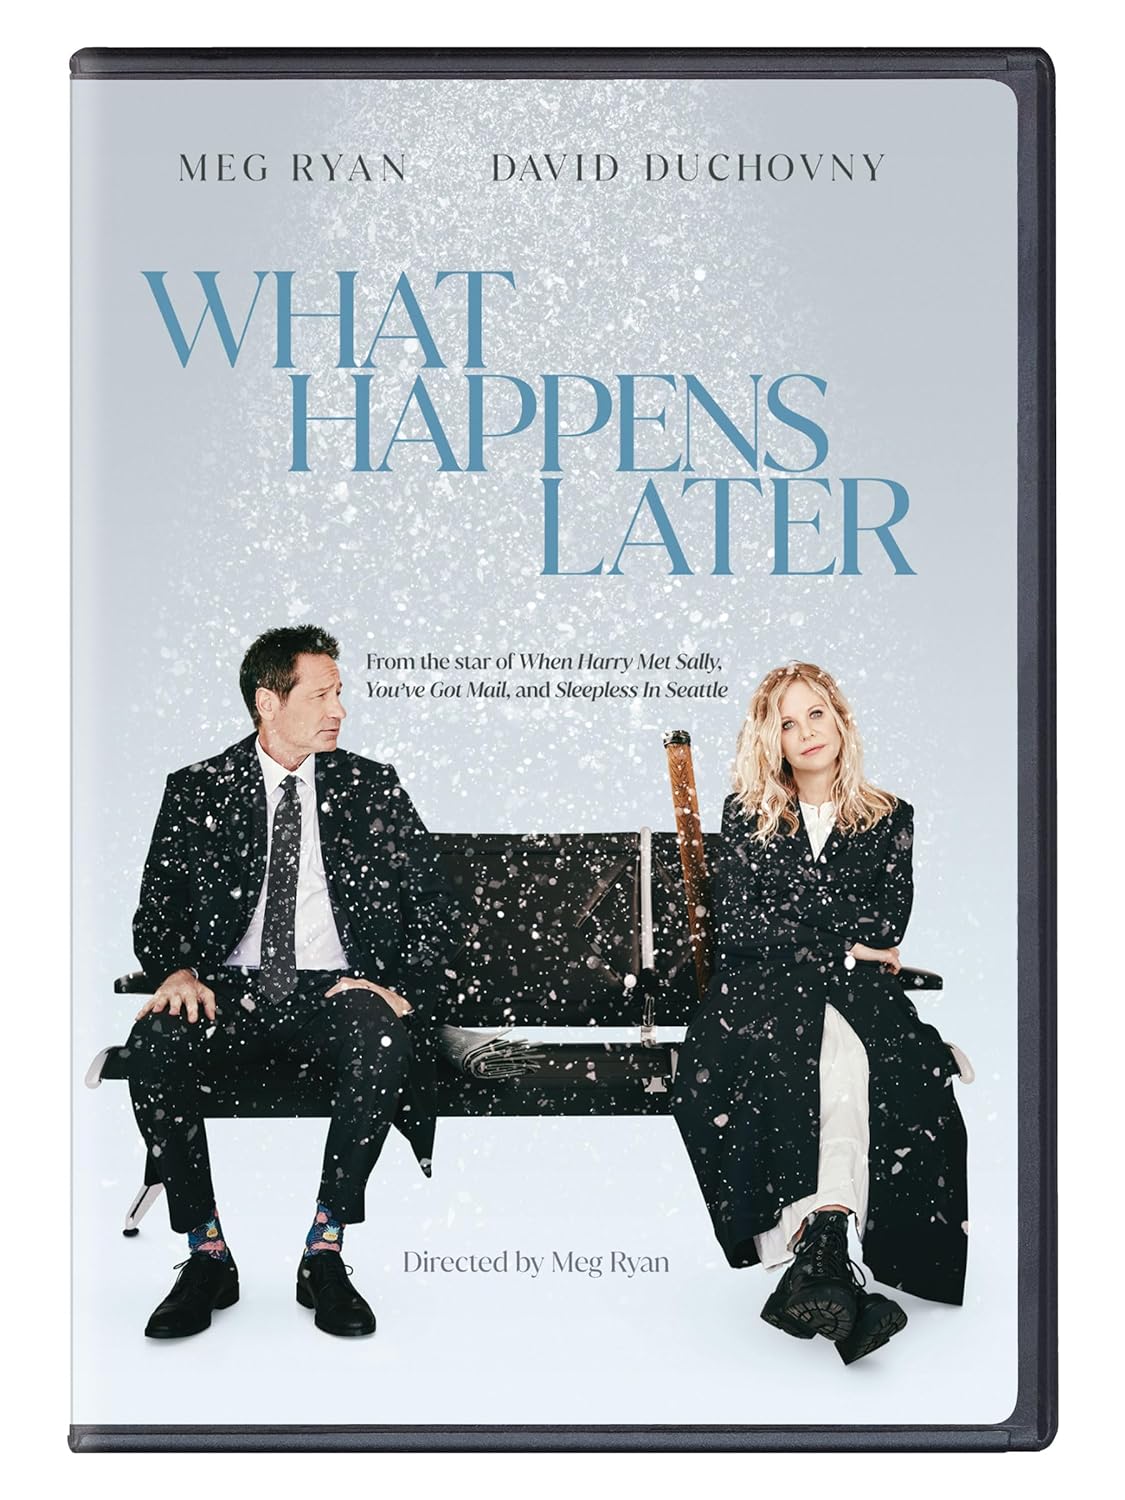 Image for "What Happens Later"